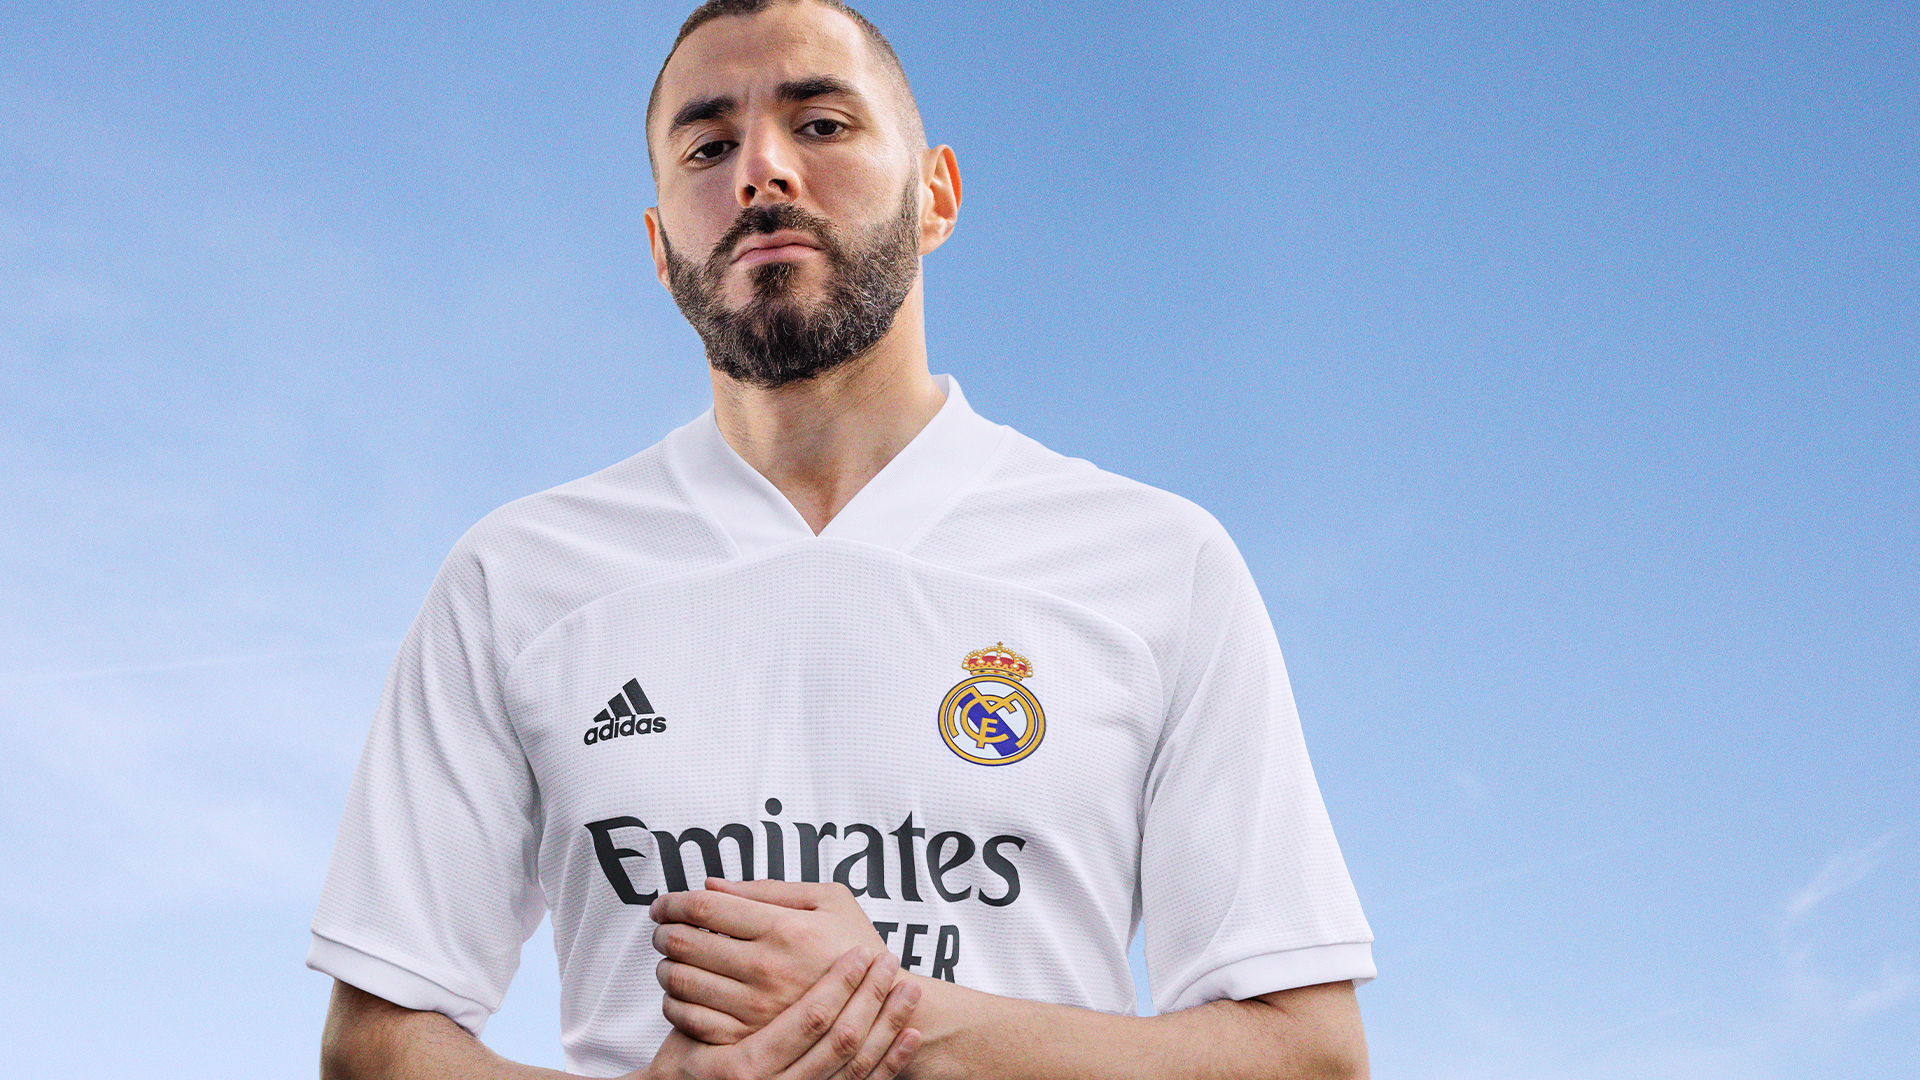 Benzema wearing new Real Madrid kit - "Parchados", lucirá escudo uniforme del RM